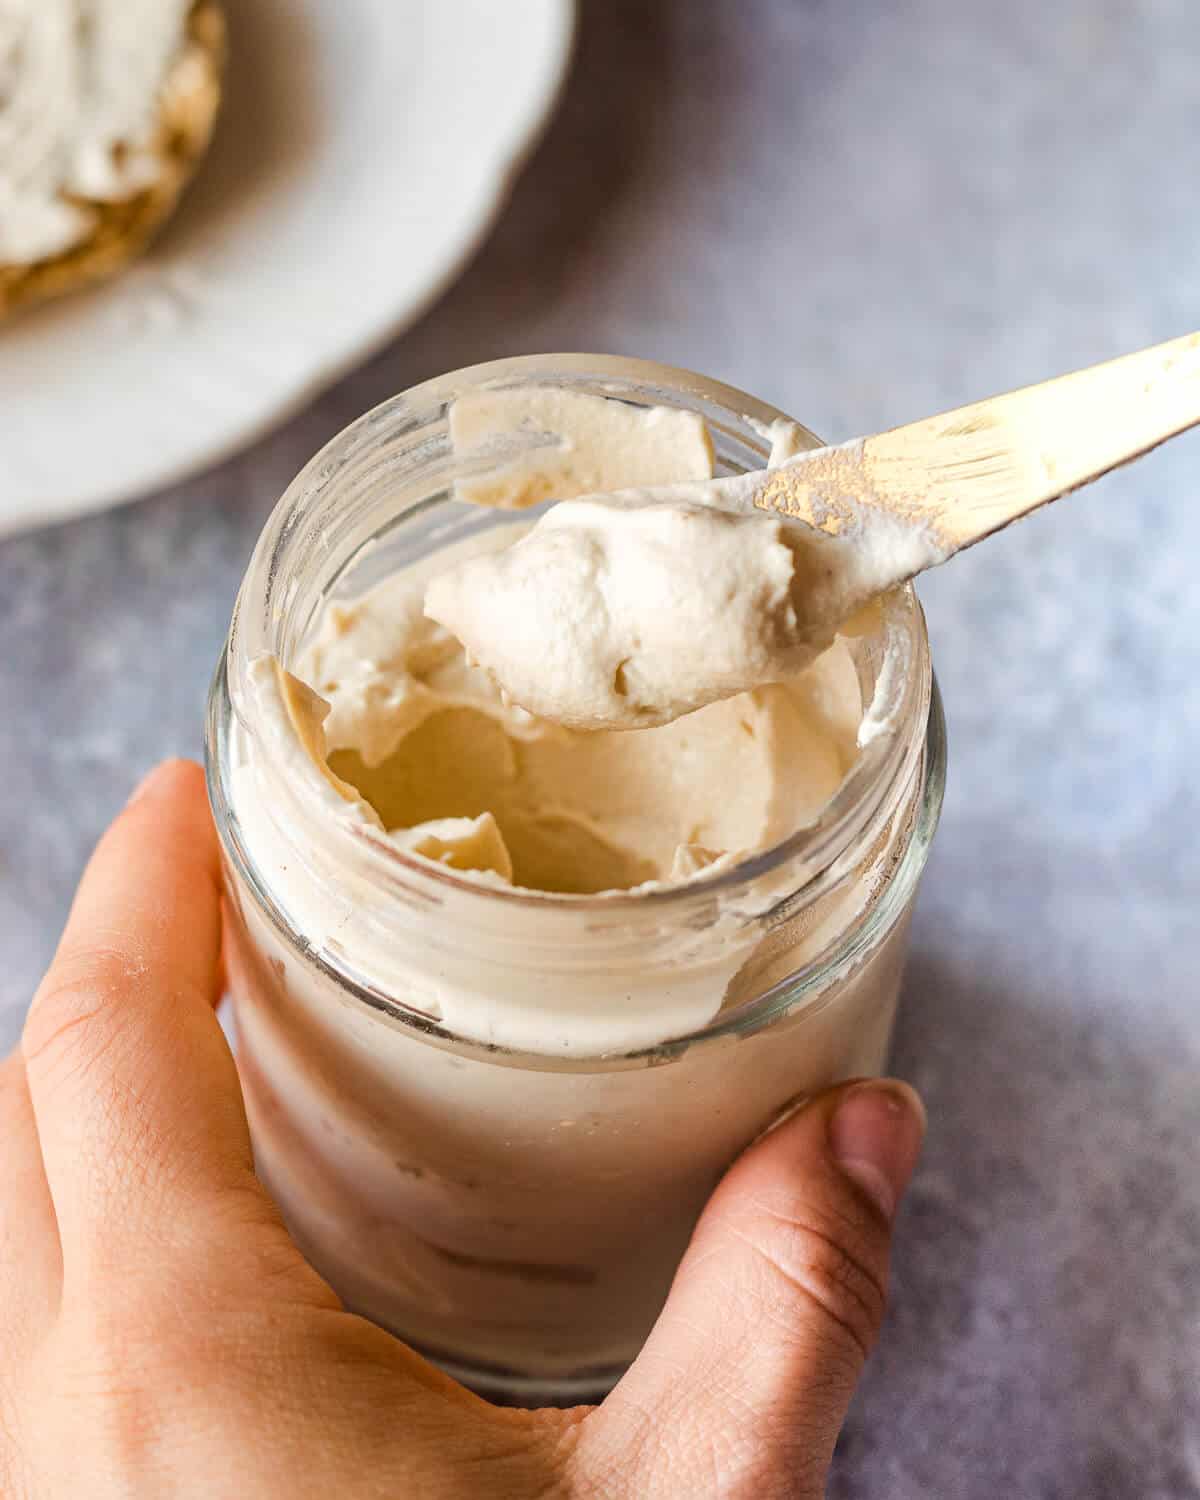 A jar of vegan cream cheese. Someone is holding the jar and a knife with some cream cheese on it. There is a plate in the background.